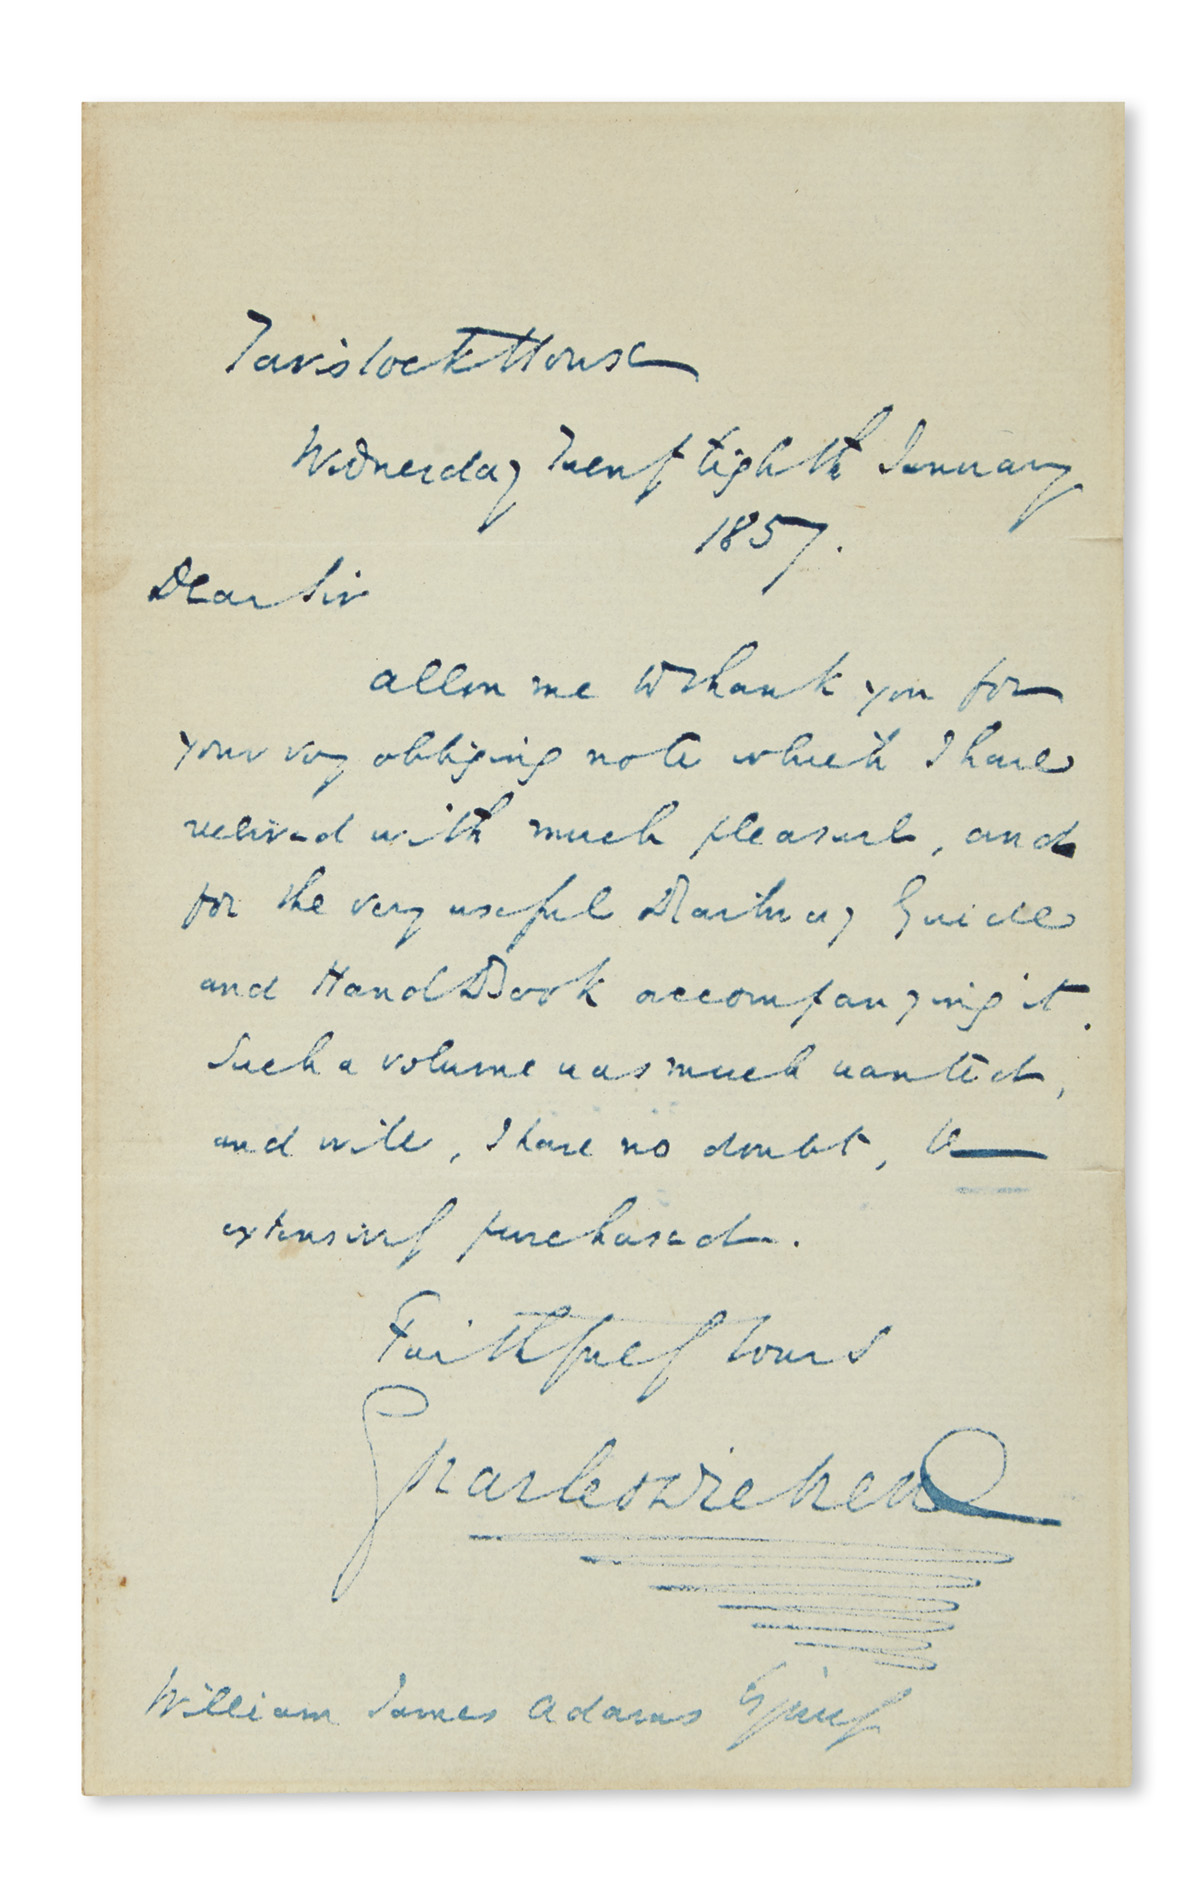 DICKENS, CHARLES. Autograph Letter Signed, to publisher William James Adams, thanking for a gift.